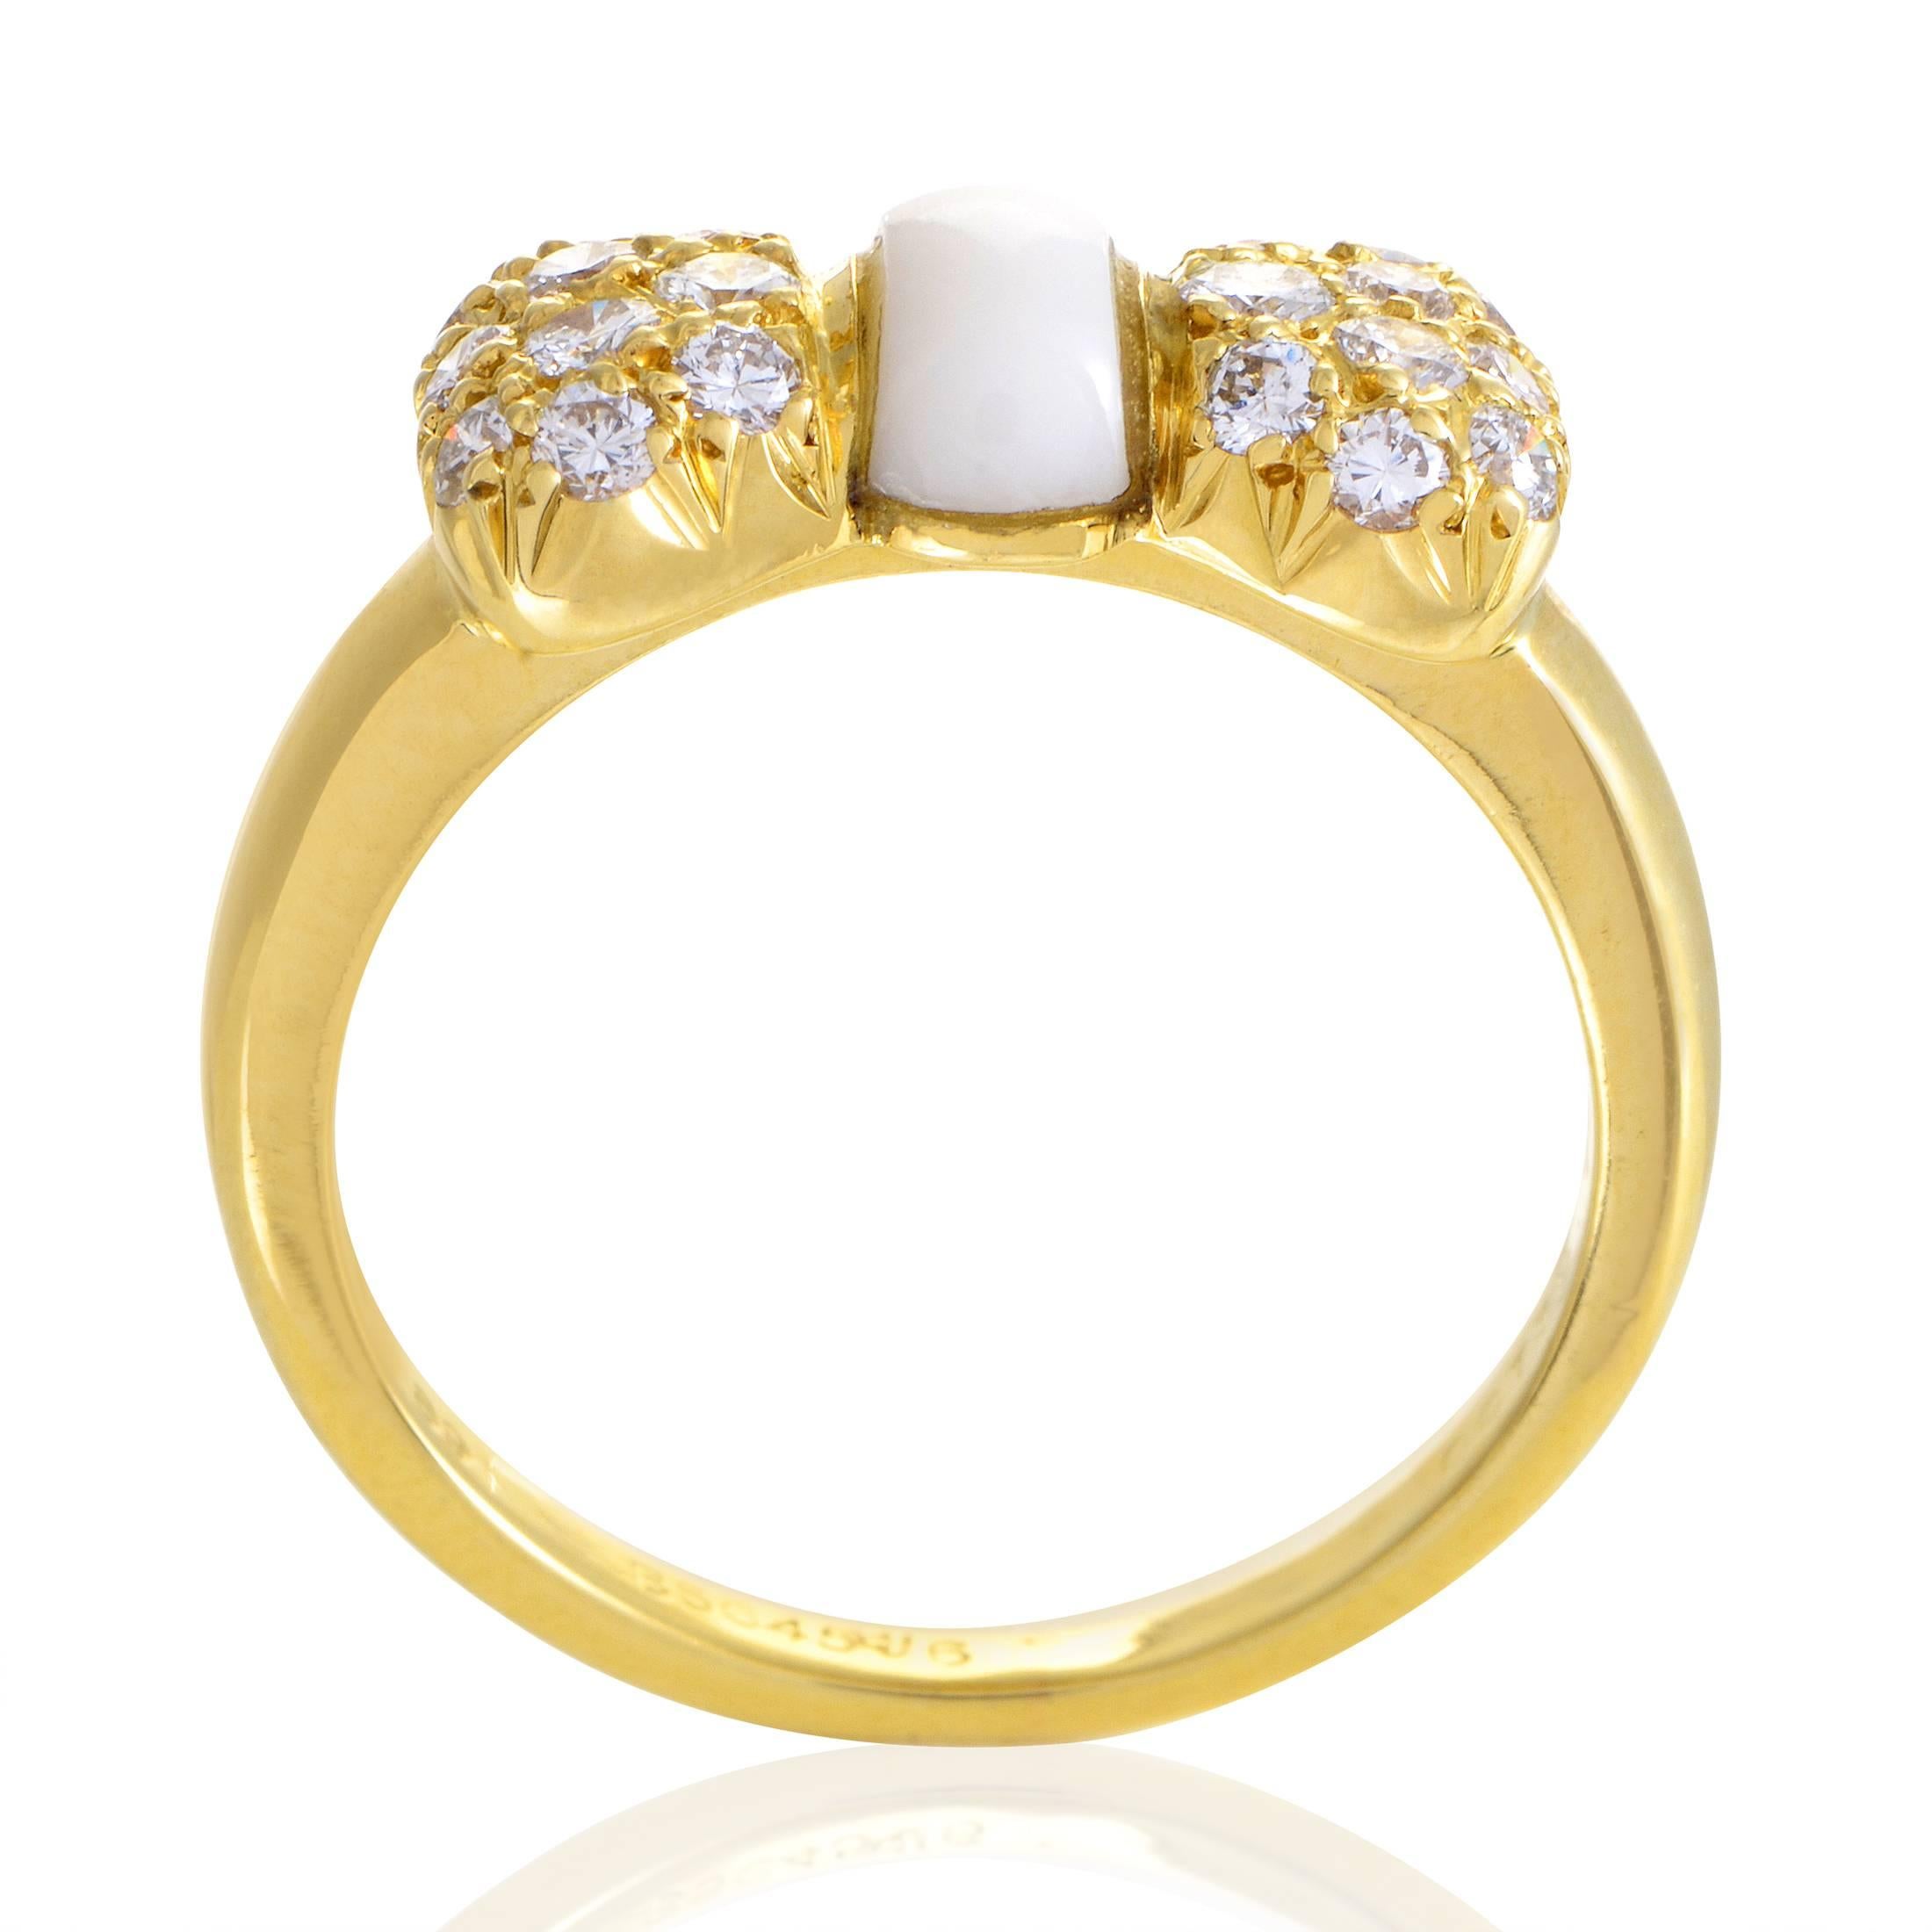 Brilliantly countering the warm radiance of 18K yellow gold and complemented by the smooth brightness of the tender white agate, lustrous diamonds totaling 0.39ct produce a scintillating allure in this adorable ring from Van Cleef & Arpels which is